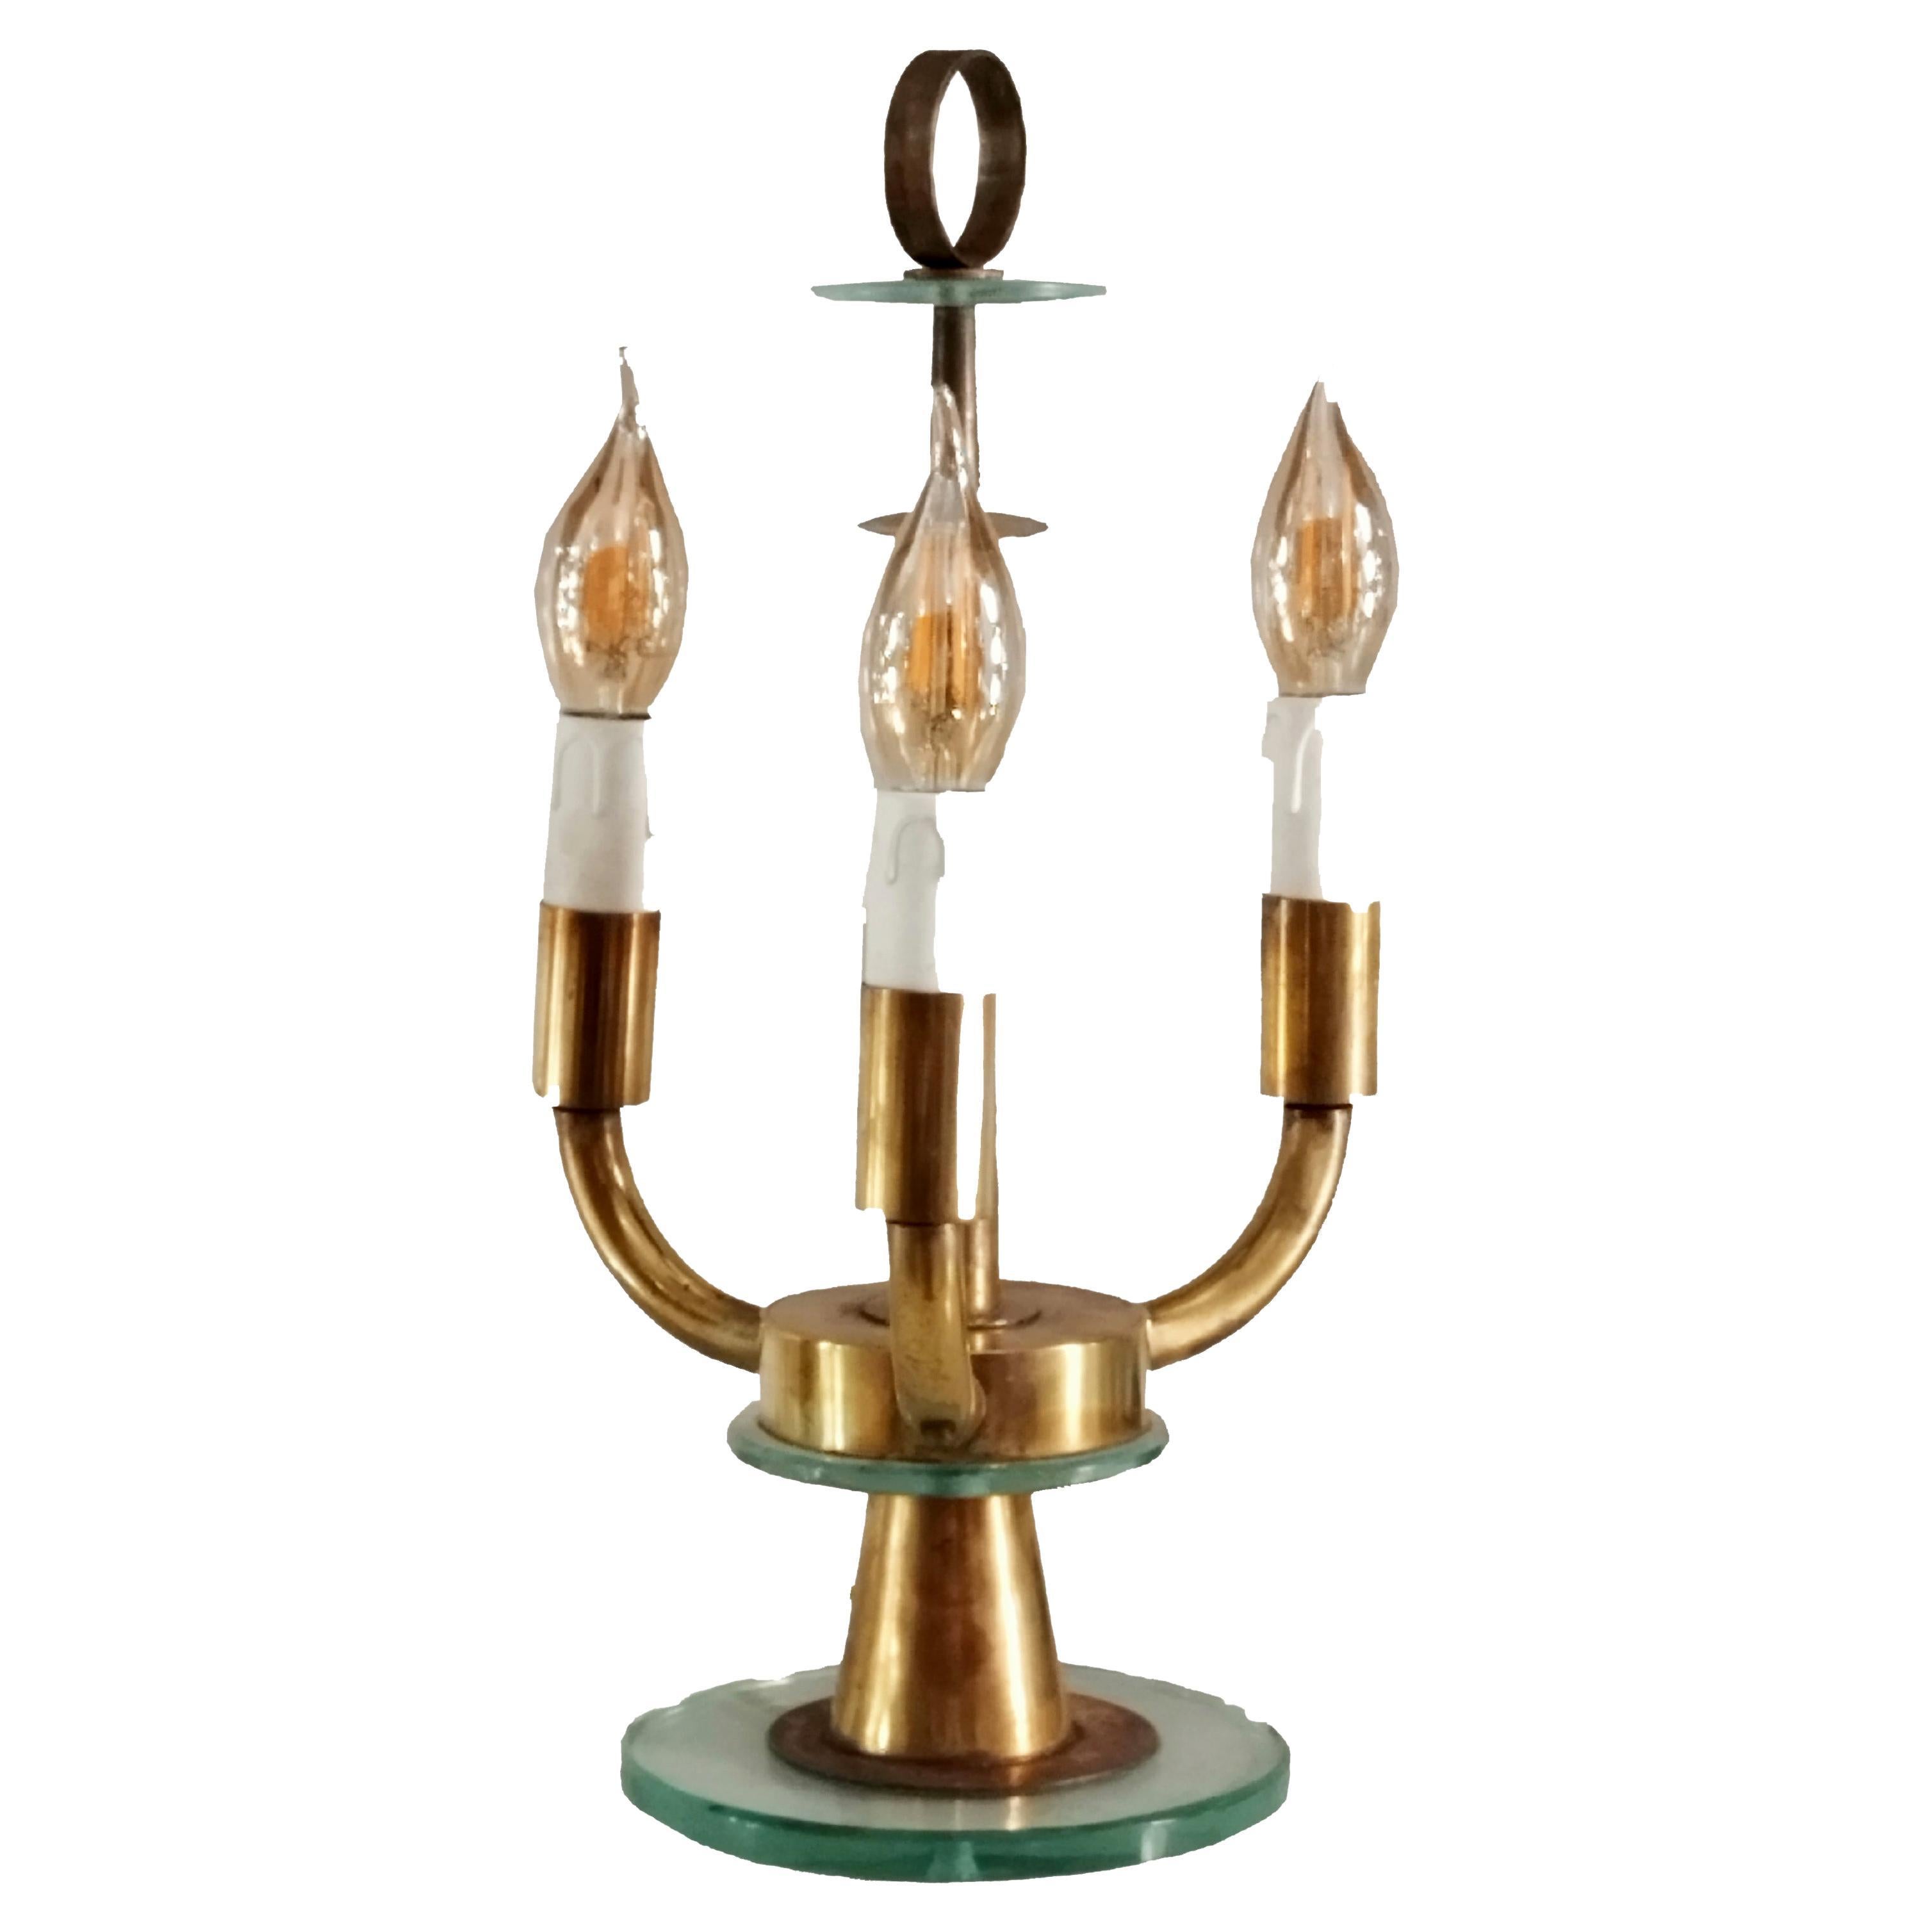 Pietro Chiesa Fontana Arte Style Brass Table Lamp, Italy, 1940s For Sale